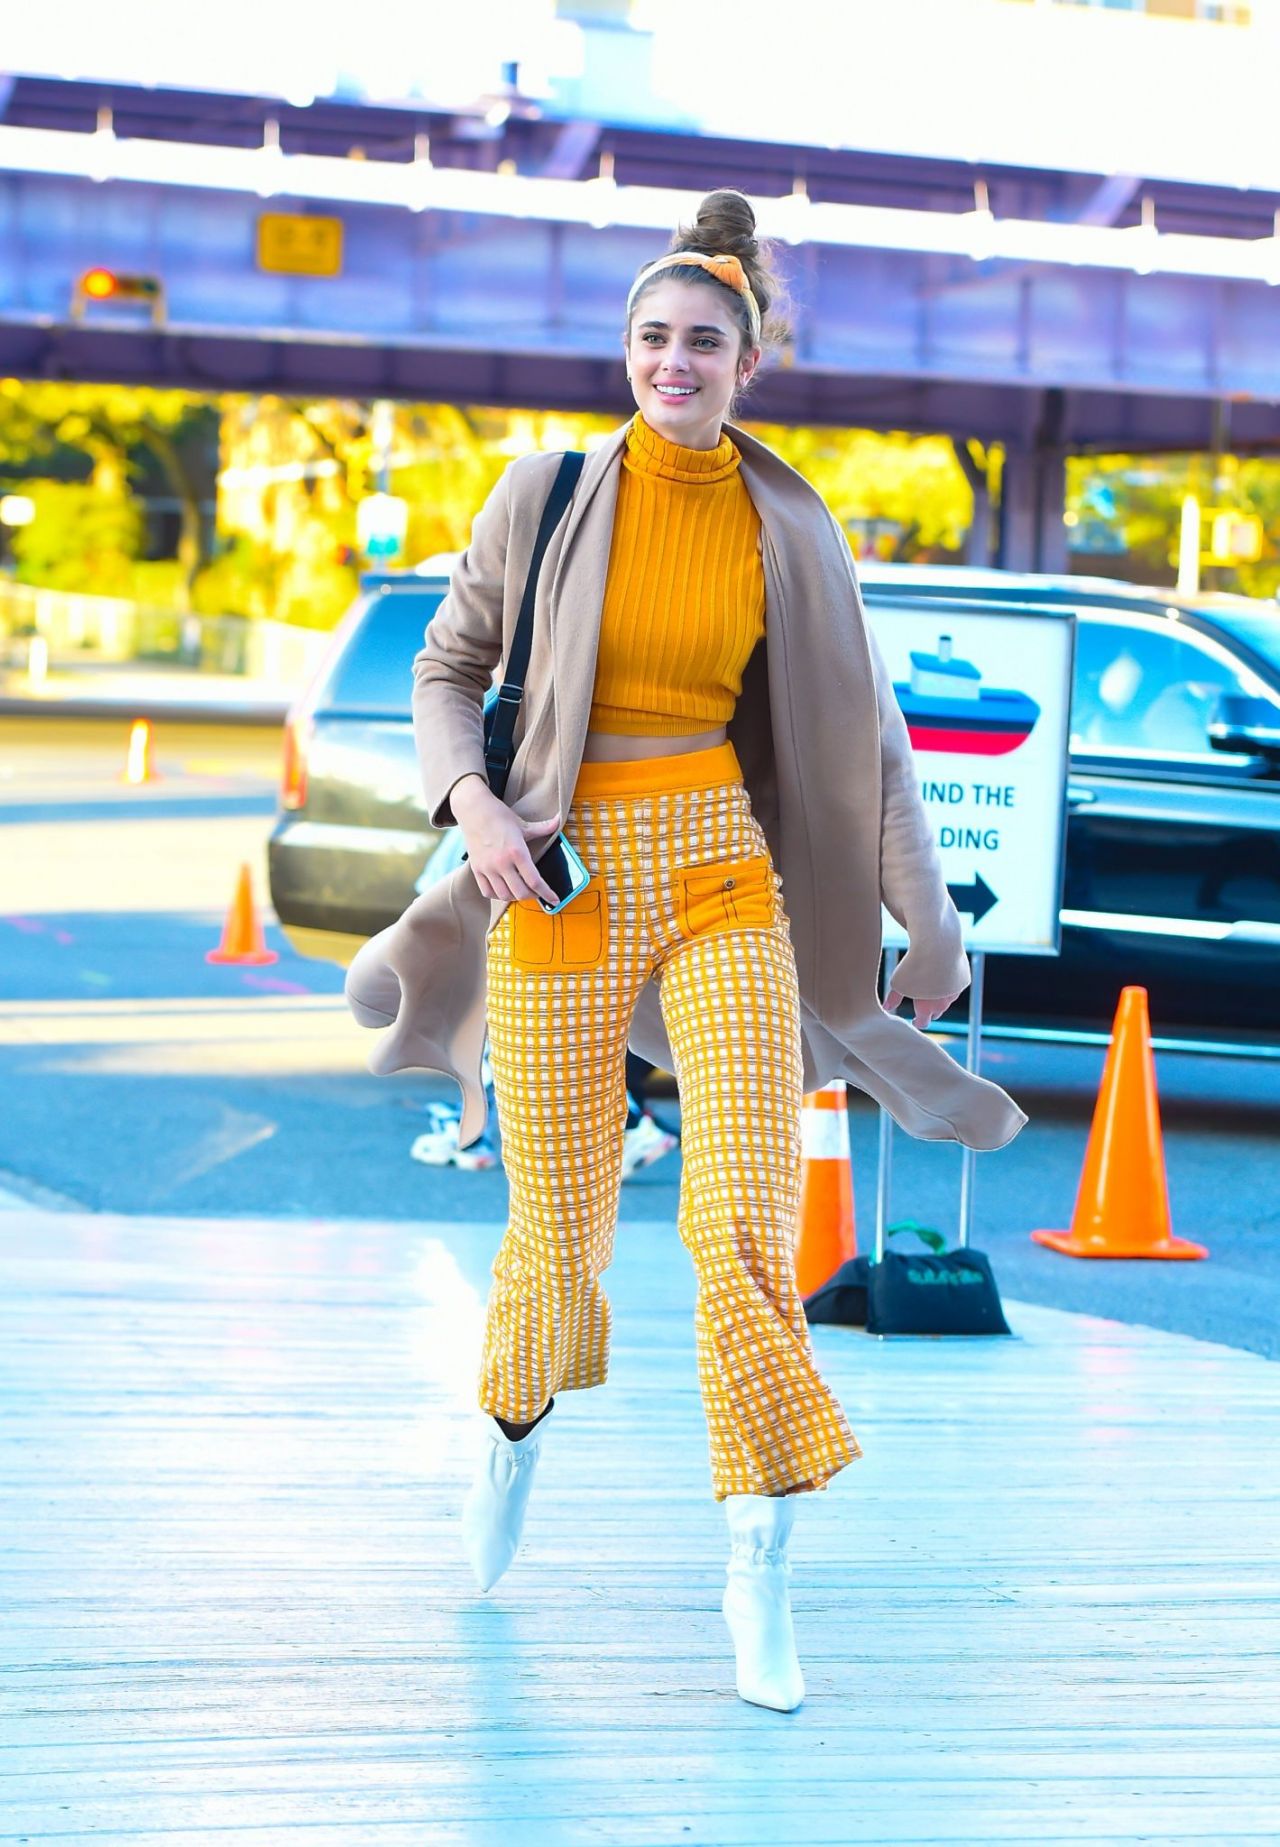 taylor-hill-is-stylish-out-in-new-york-city-10-24-2018-0.jpg